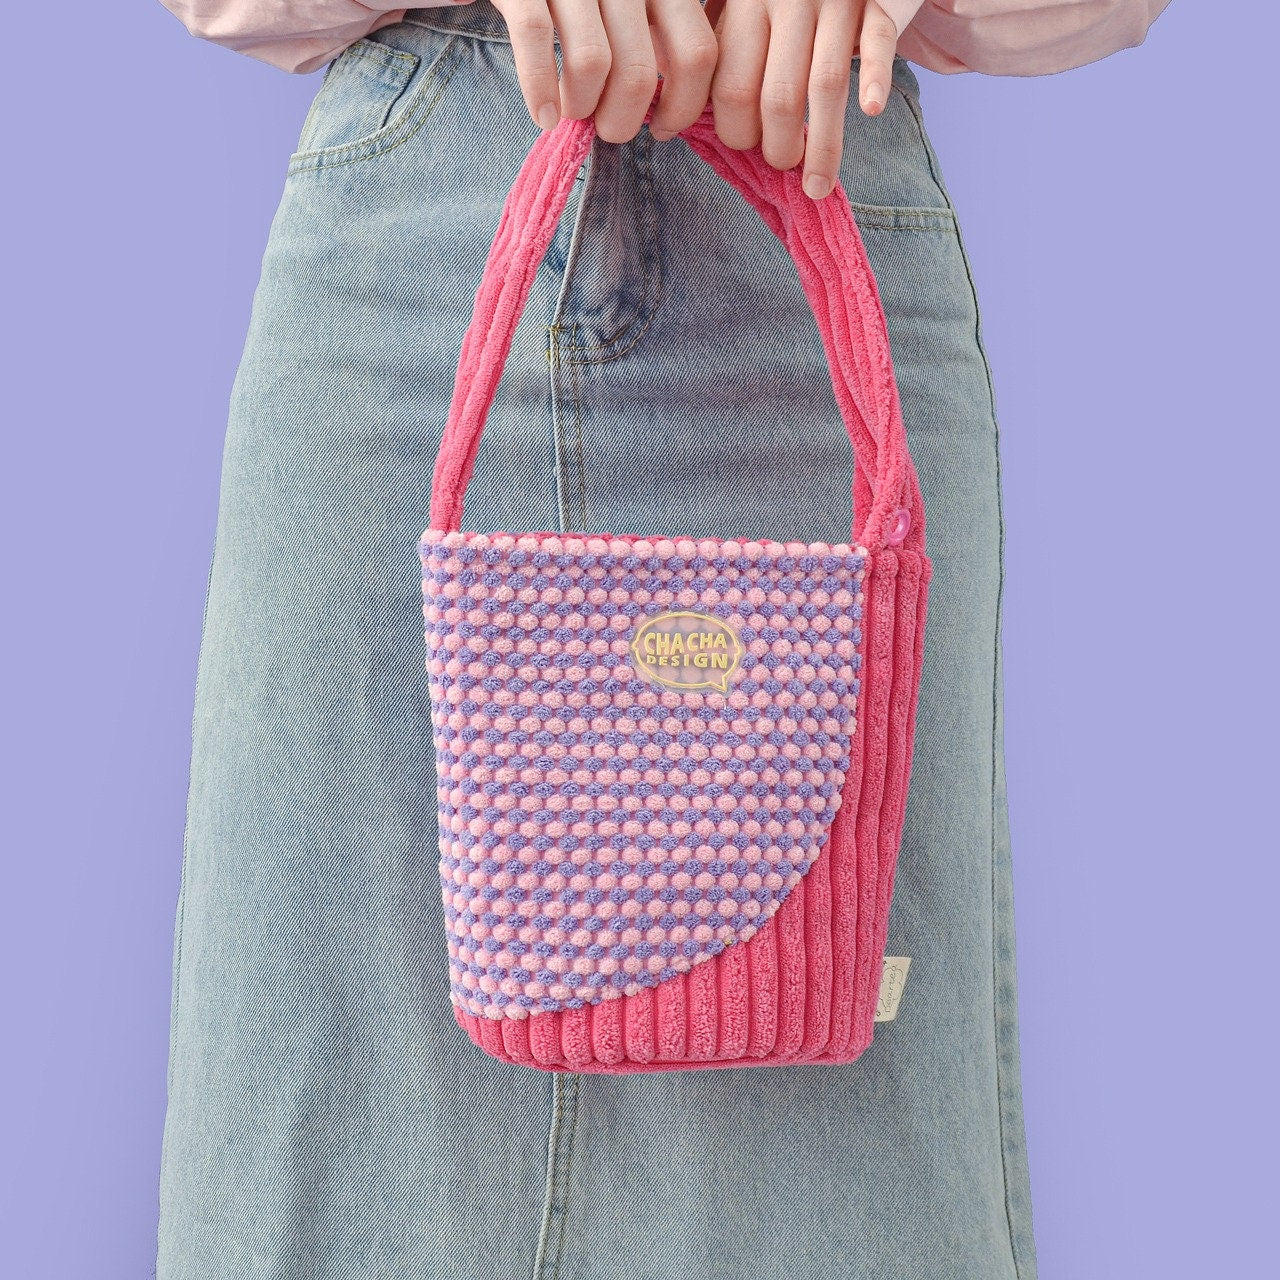 Exclusive Handmade Vibrant Series Bag Collection